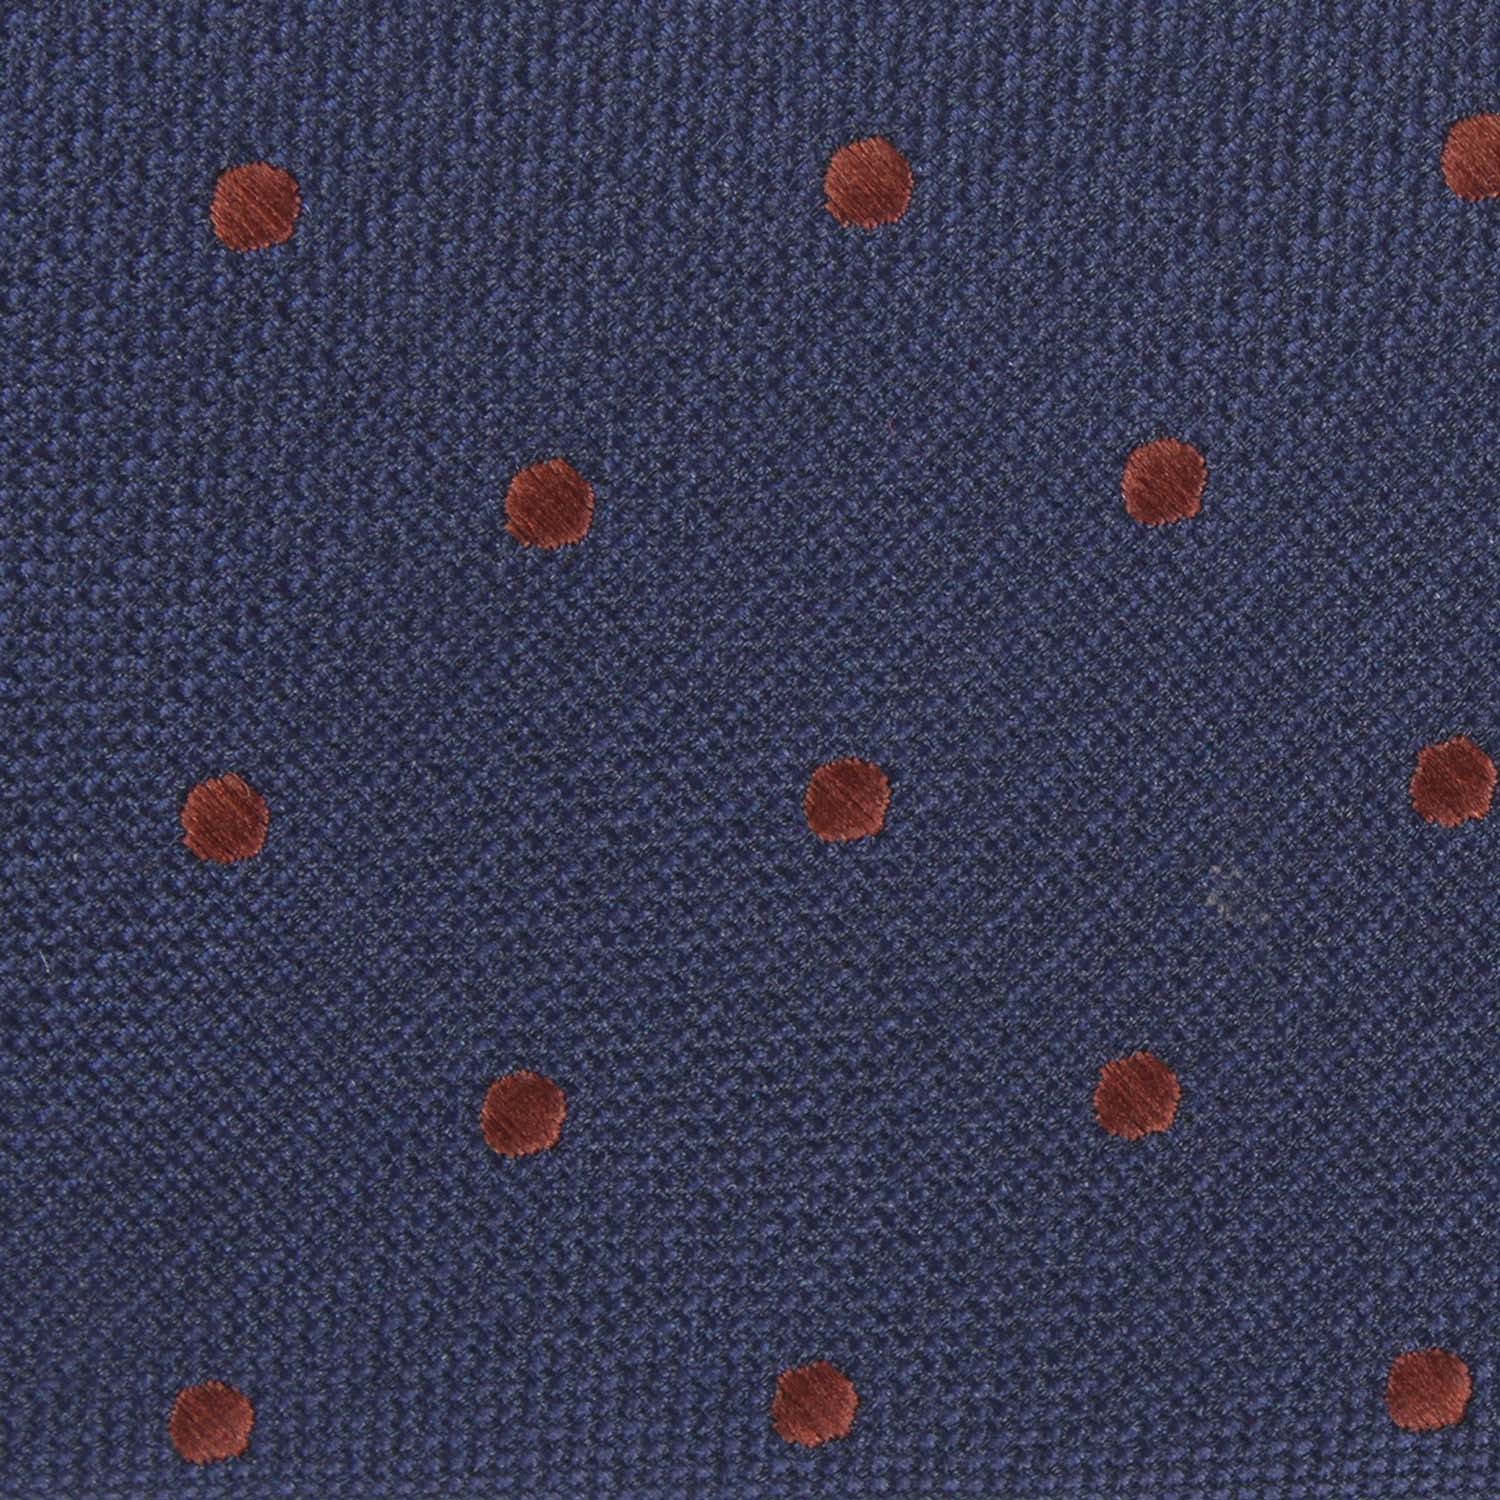 Navy Blue with Brown Polka Dots Fabric Bow Tie M128